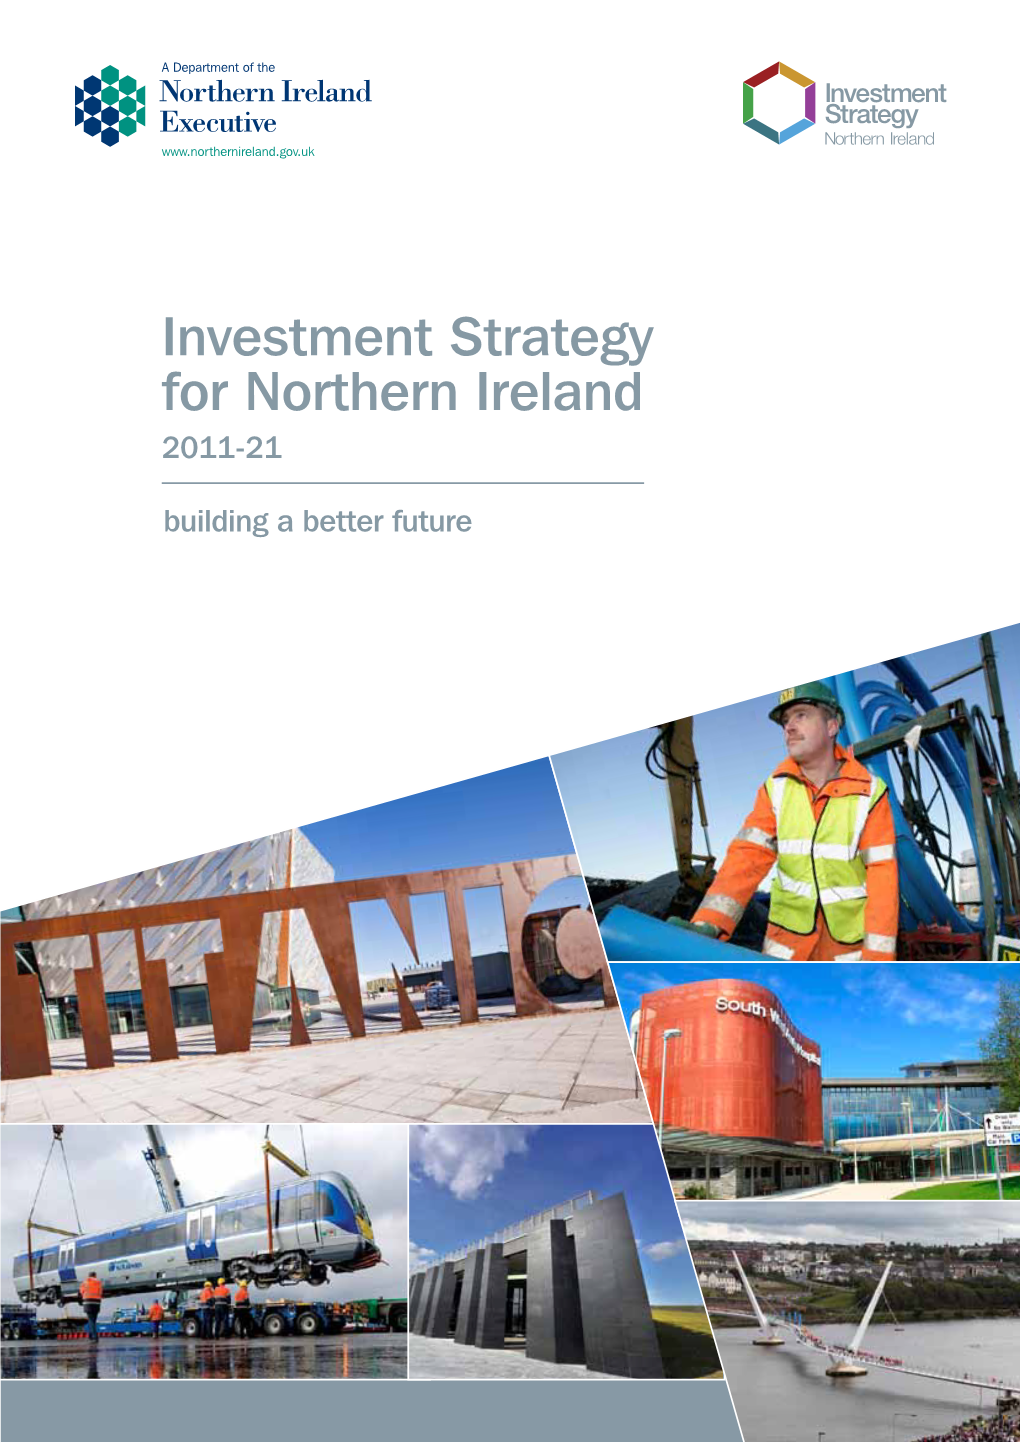 Investment Strategy for Northern Ireland 2011-21 Building a Better Future